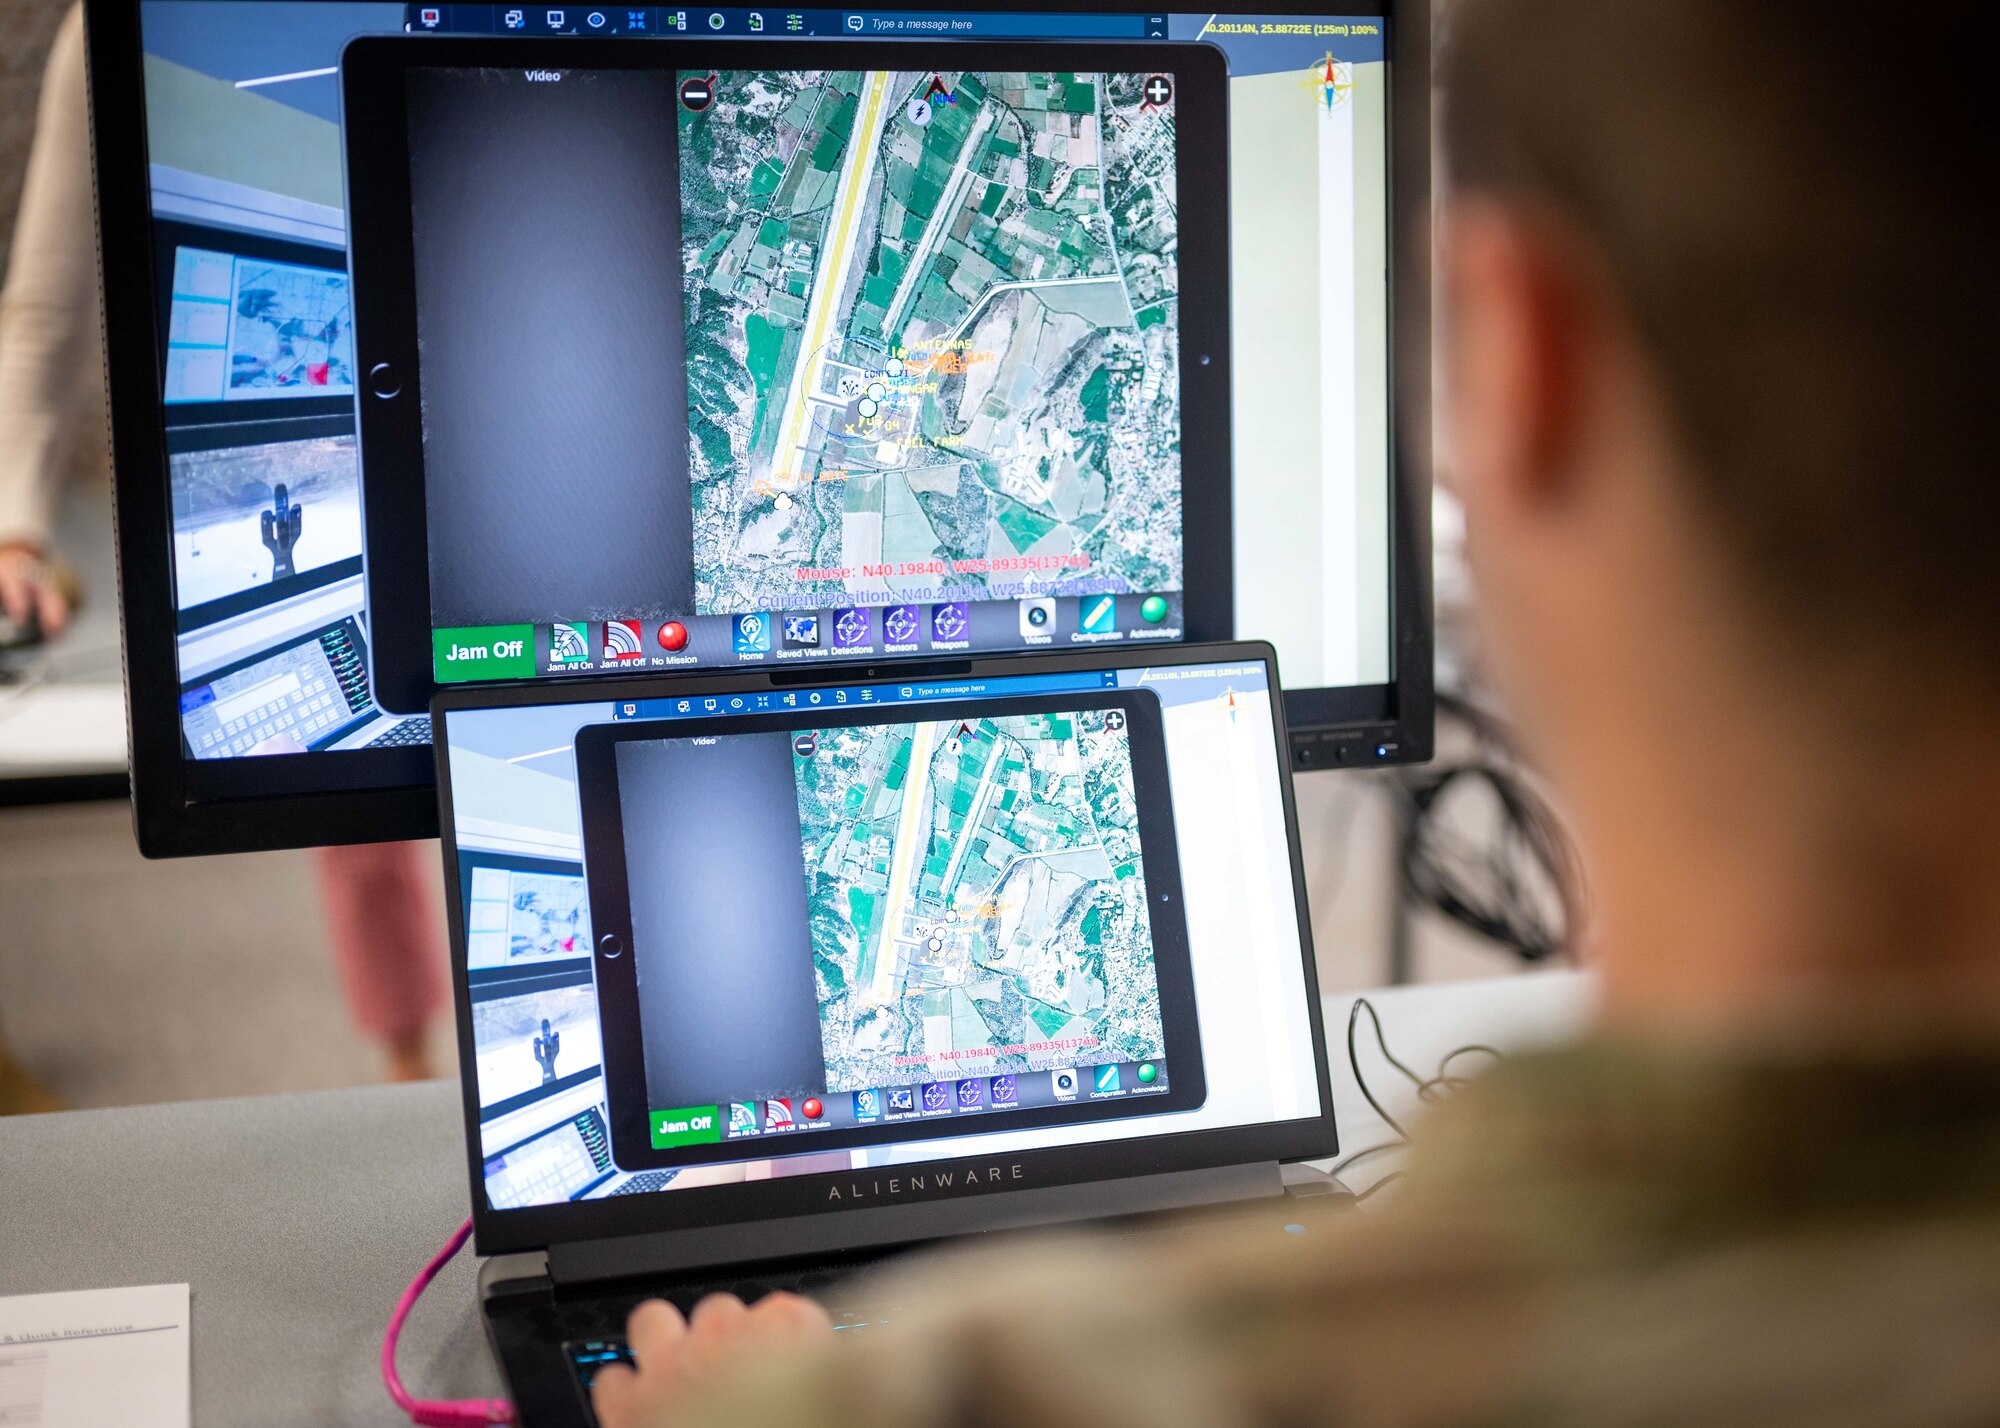 Airman reviews simulated maps on a computer screen.